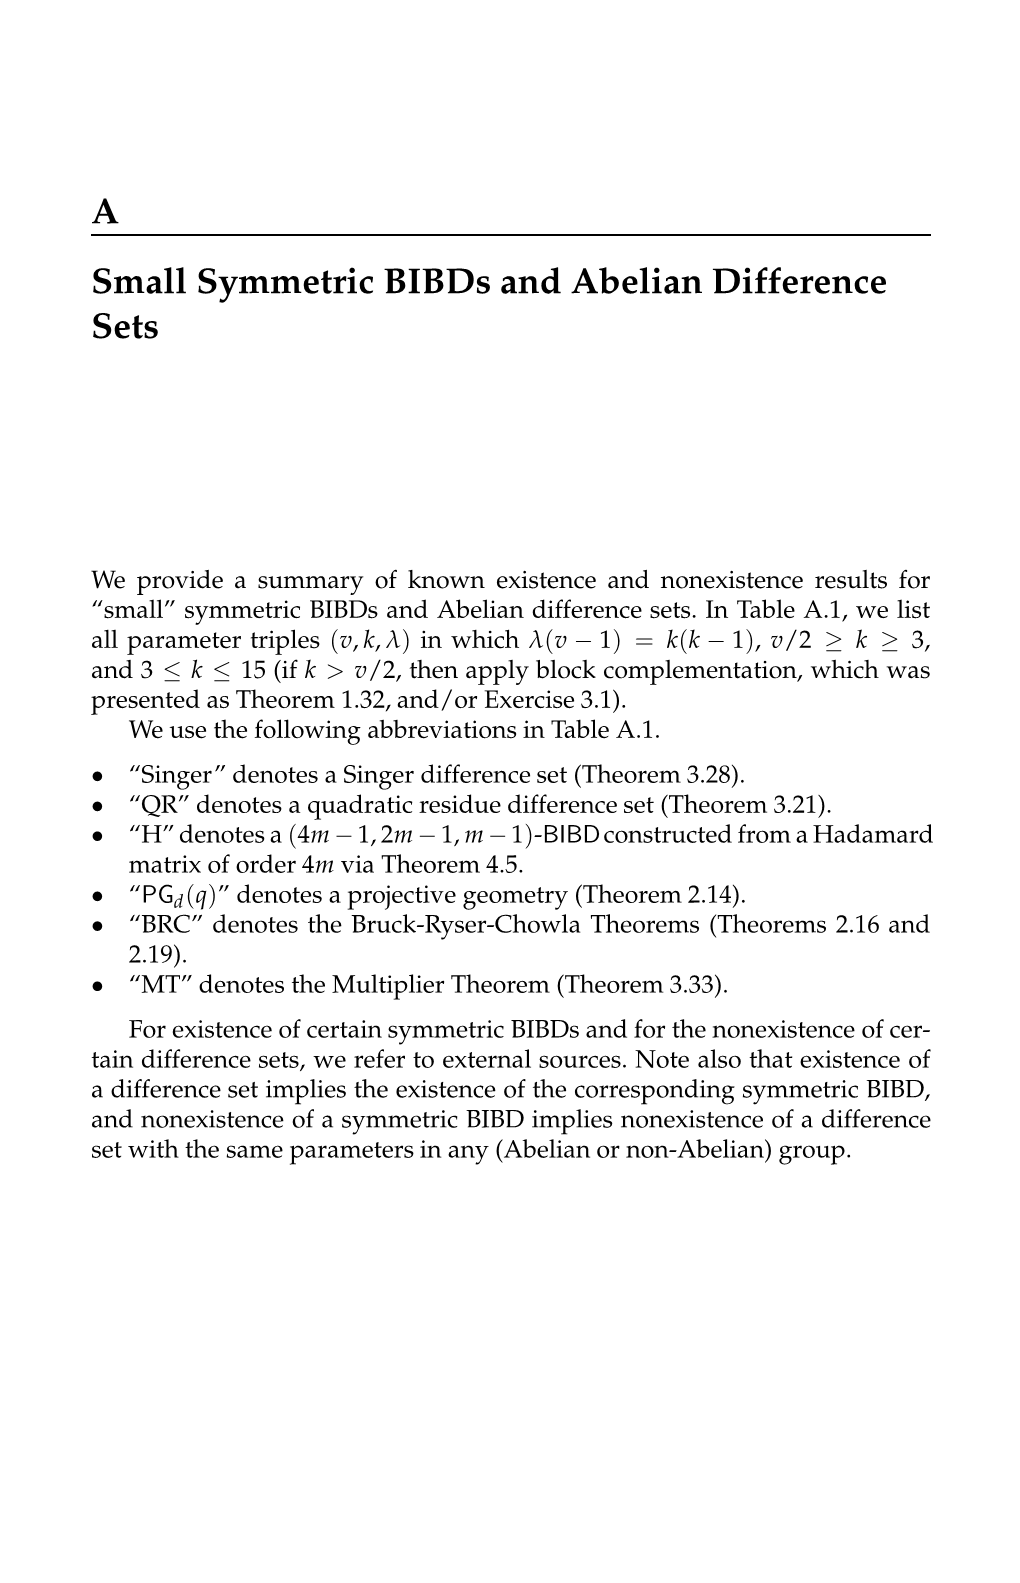 A Small Symmetric Bibds and Abelian Difference Sets